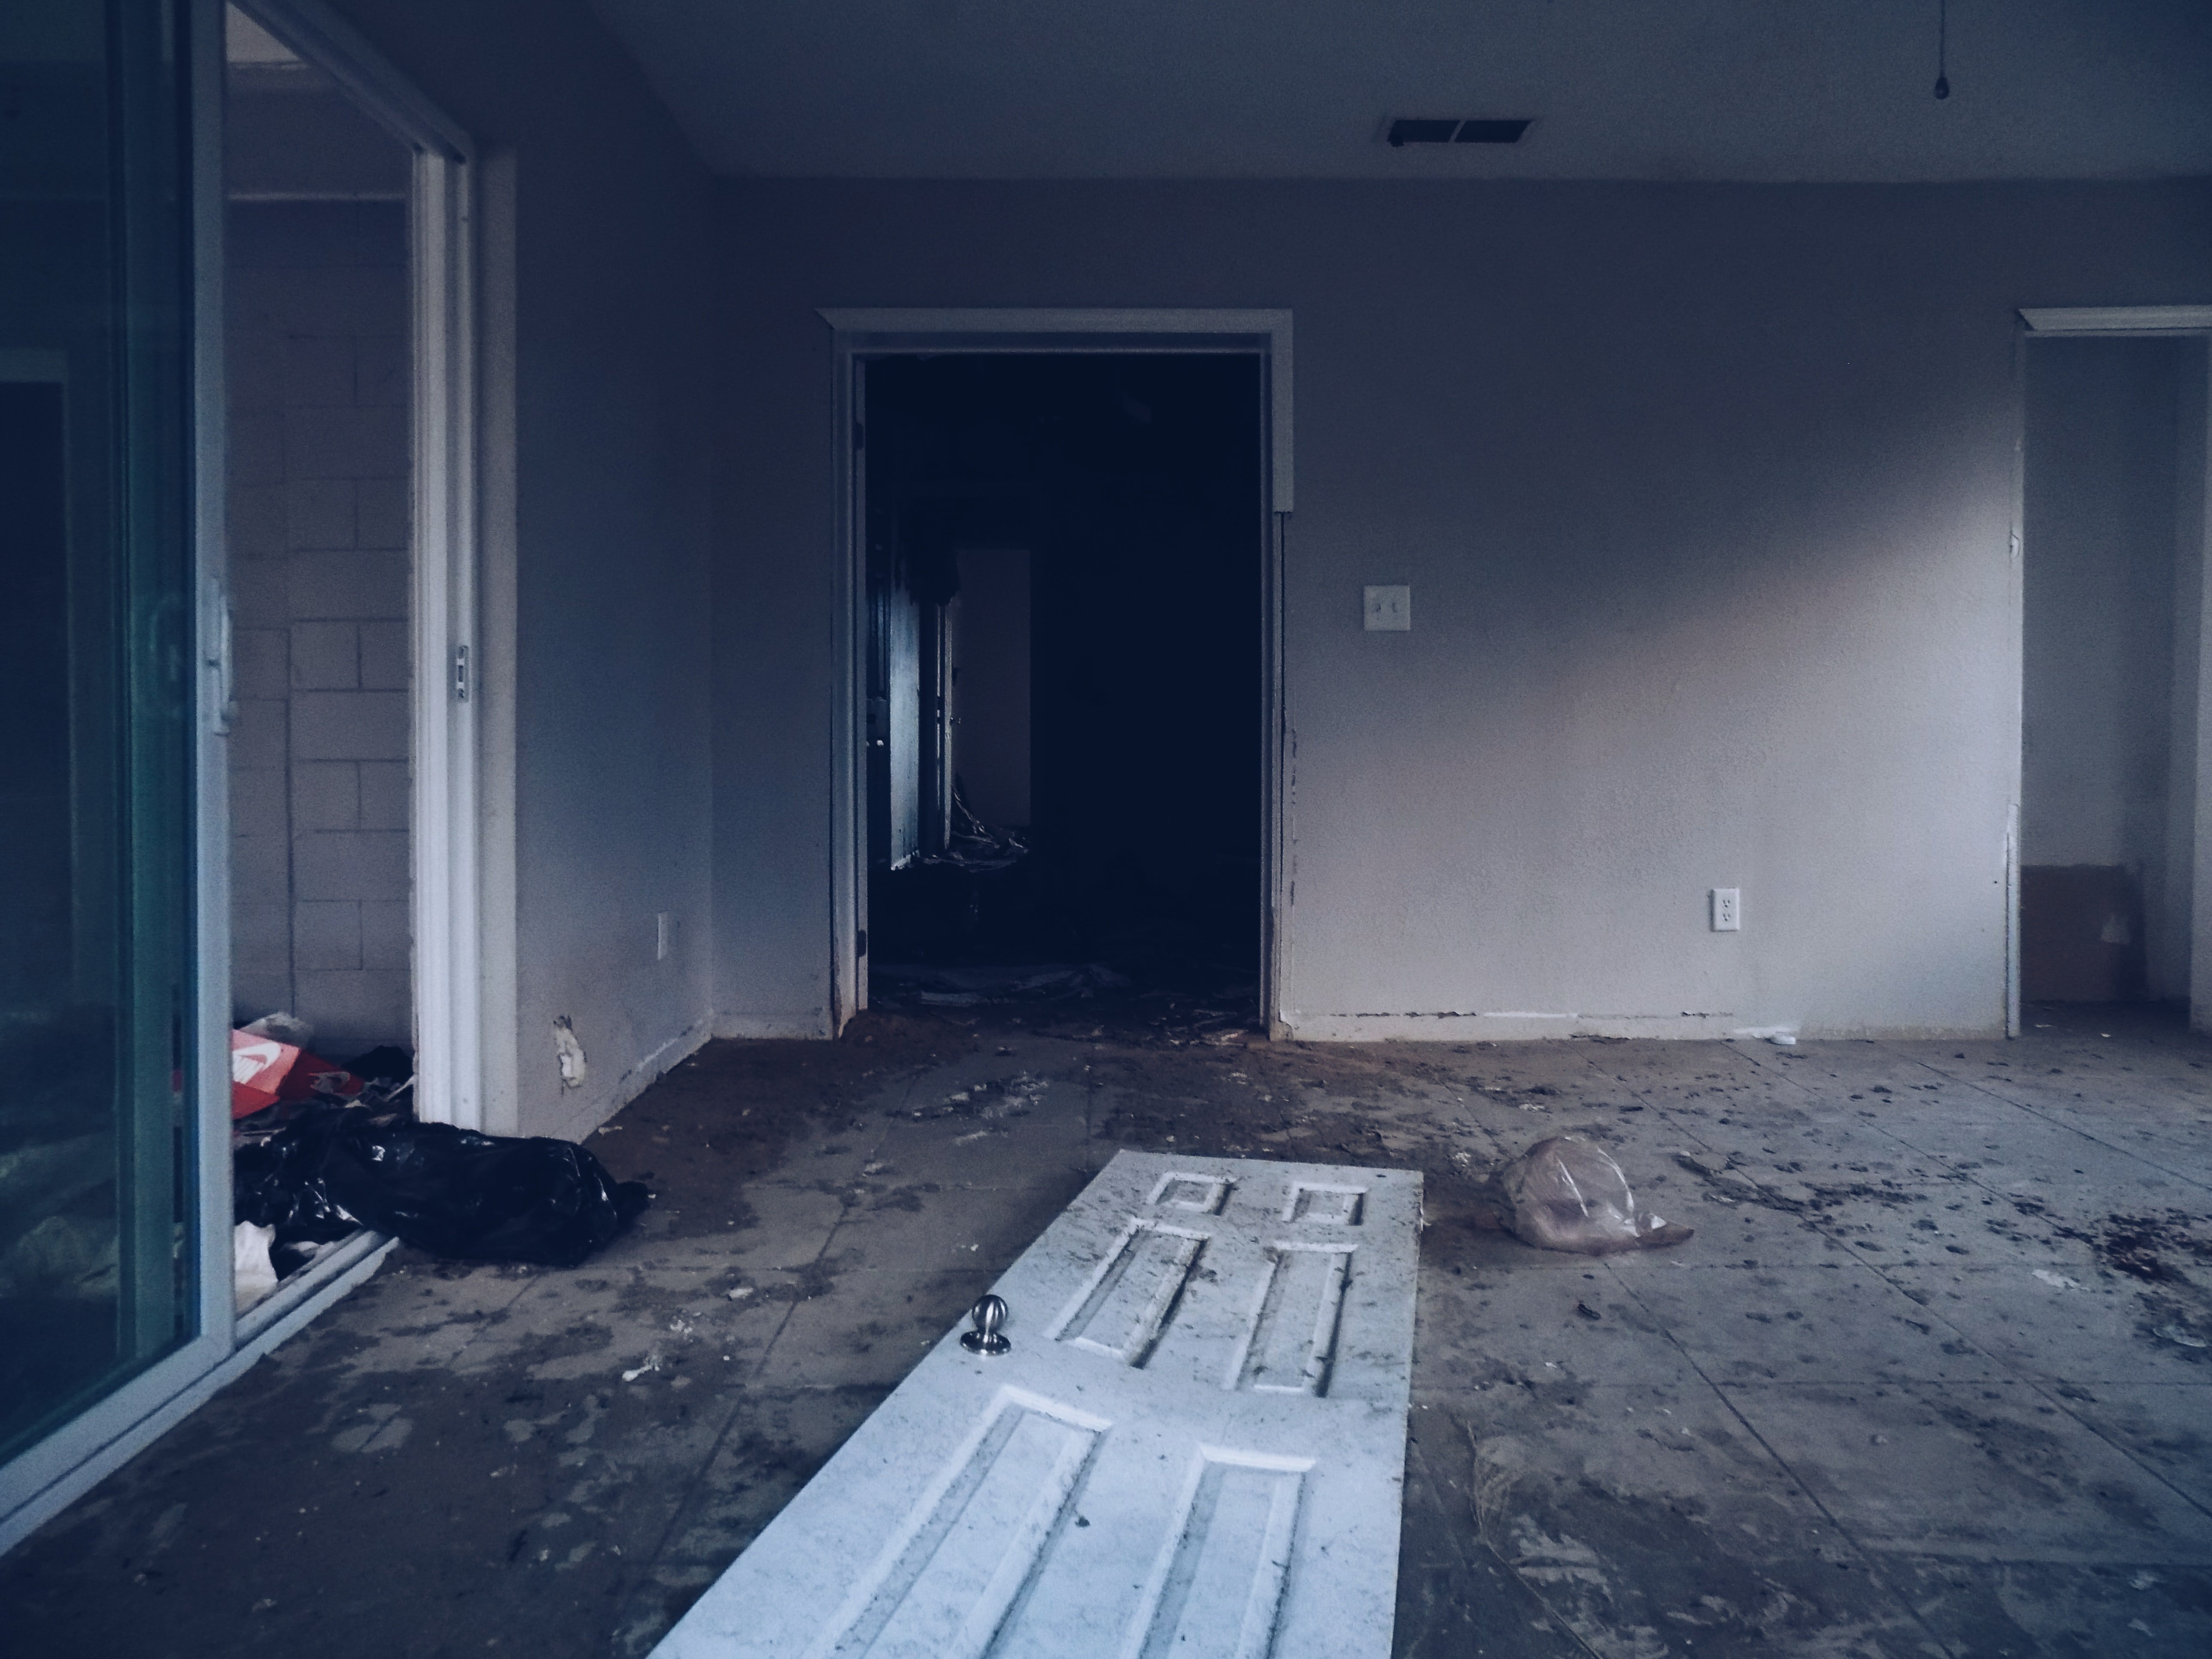 Ted found Sarah and Charlotte living in the abandoned house. | Source: Unsplash